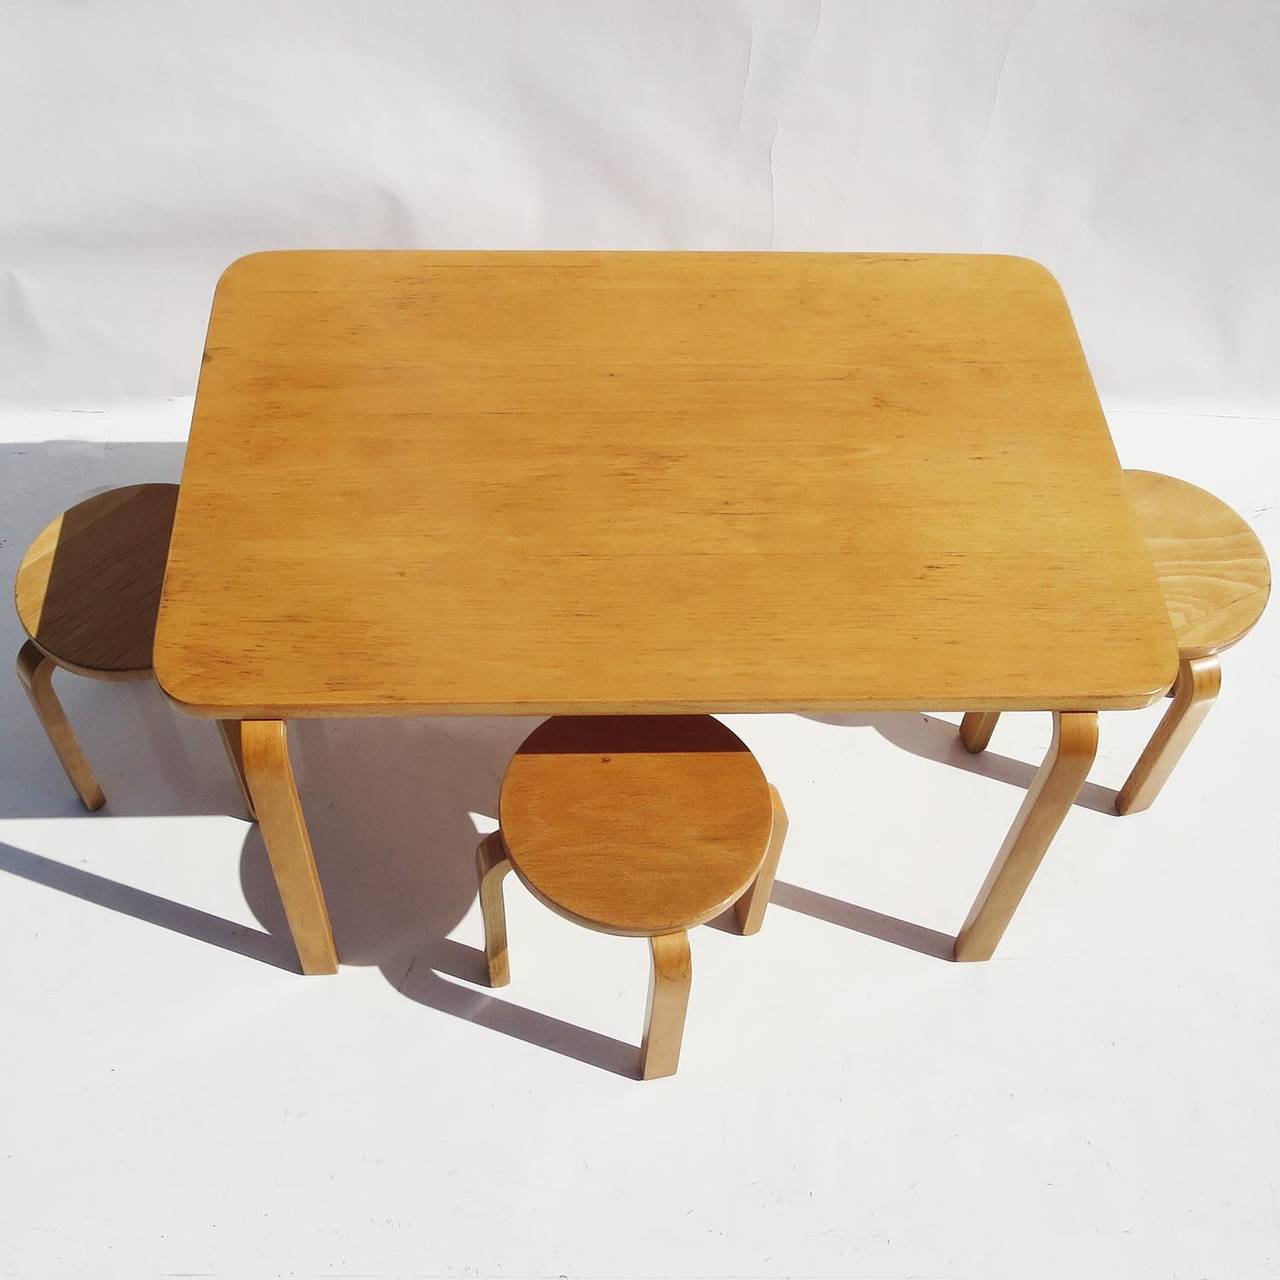 Alvar Aalto, Finland's answer to Charles Eames, created a wide array of iconic furniture designs in his fruitful career. Working in steamed and formed laminated woods, he was able to fashion designs that were previously impossible. It was only